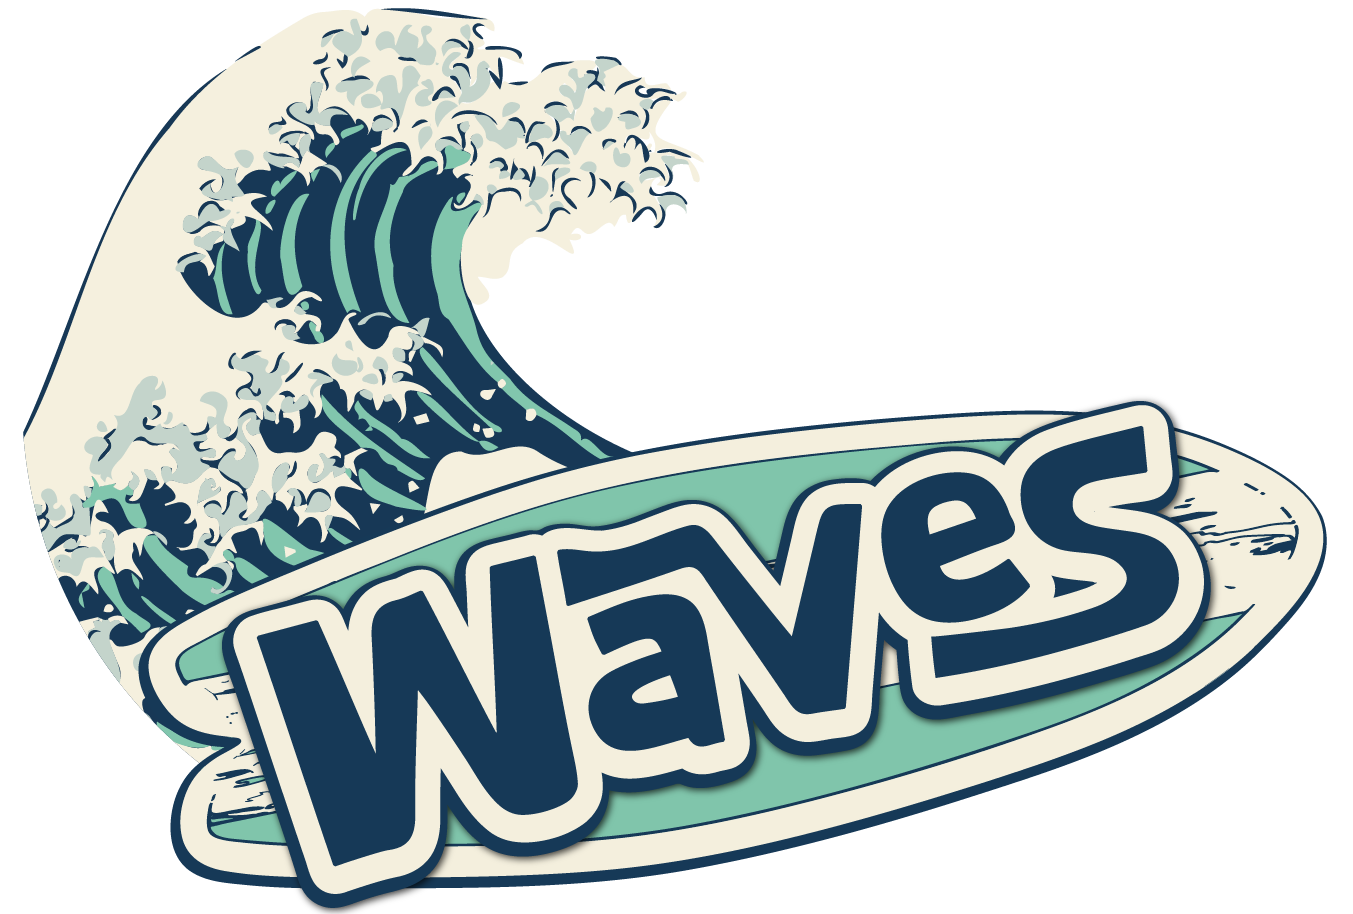 WAVES CAR WASH LOGO - VINTAGE SURFBOARD WITH THE WORD WAVES CAR WASH ON TOP AND THE GREAT WAVE